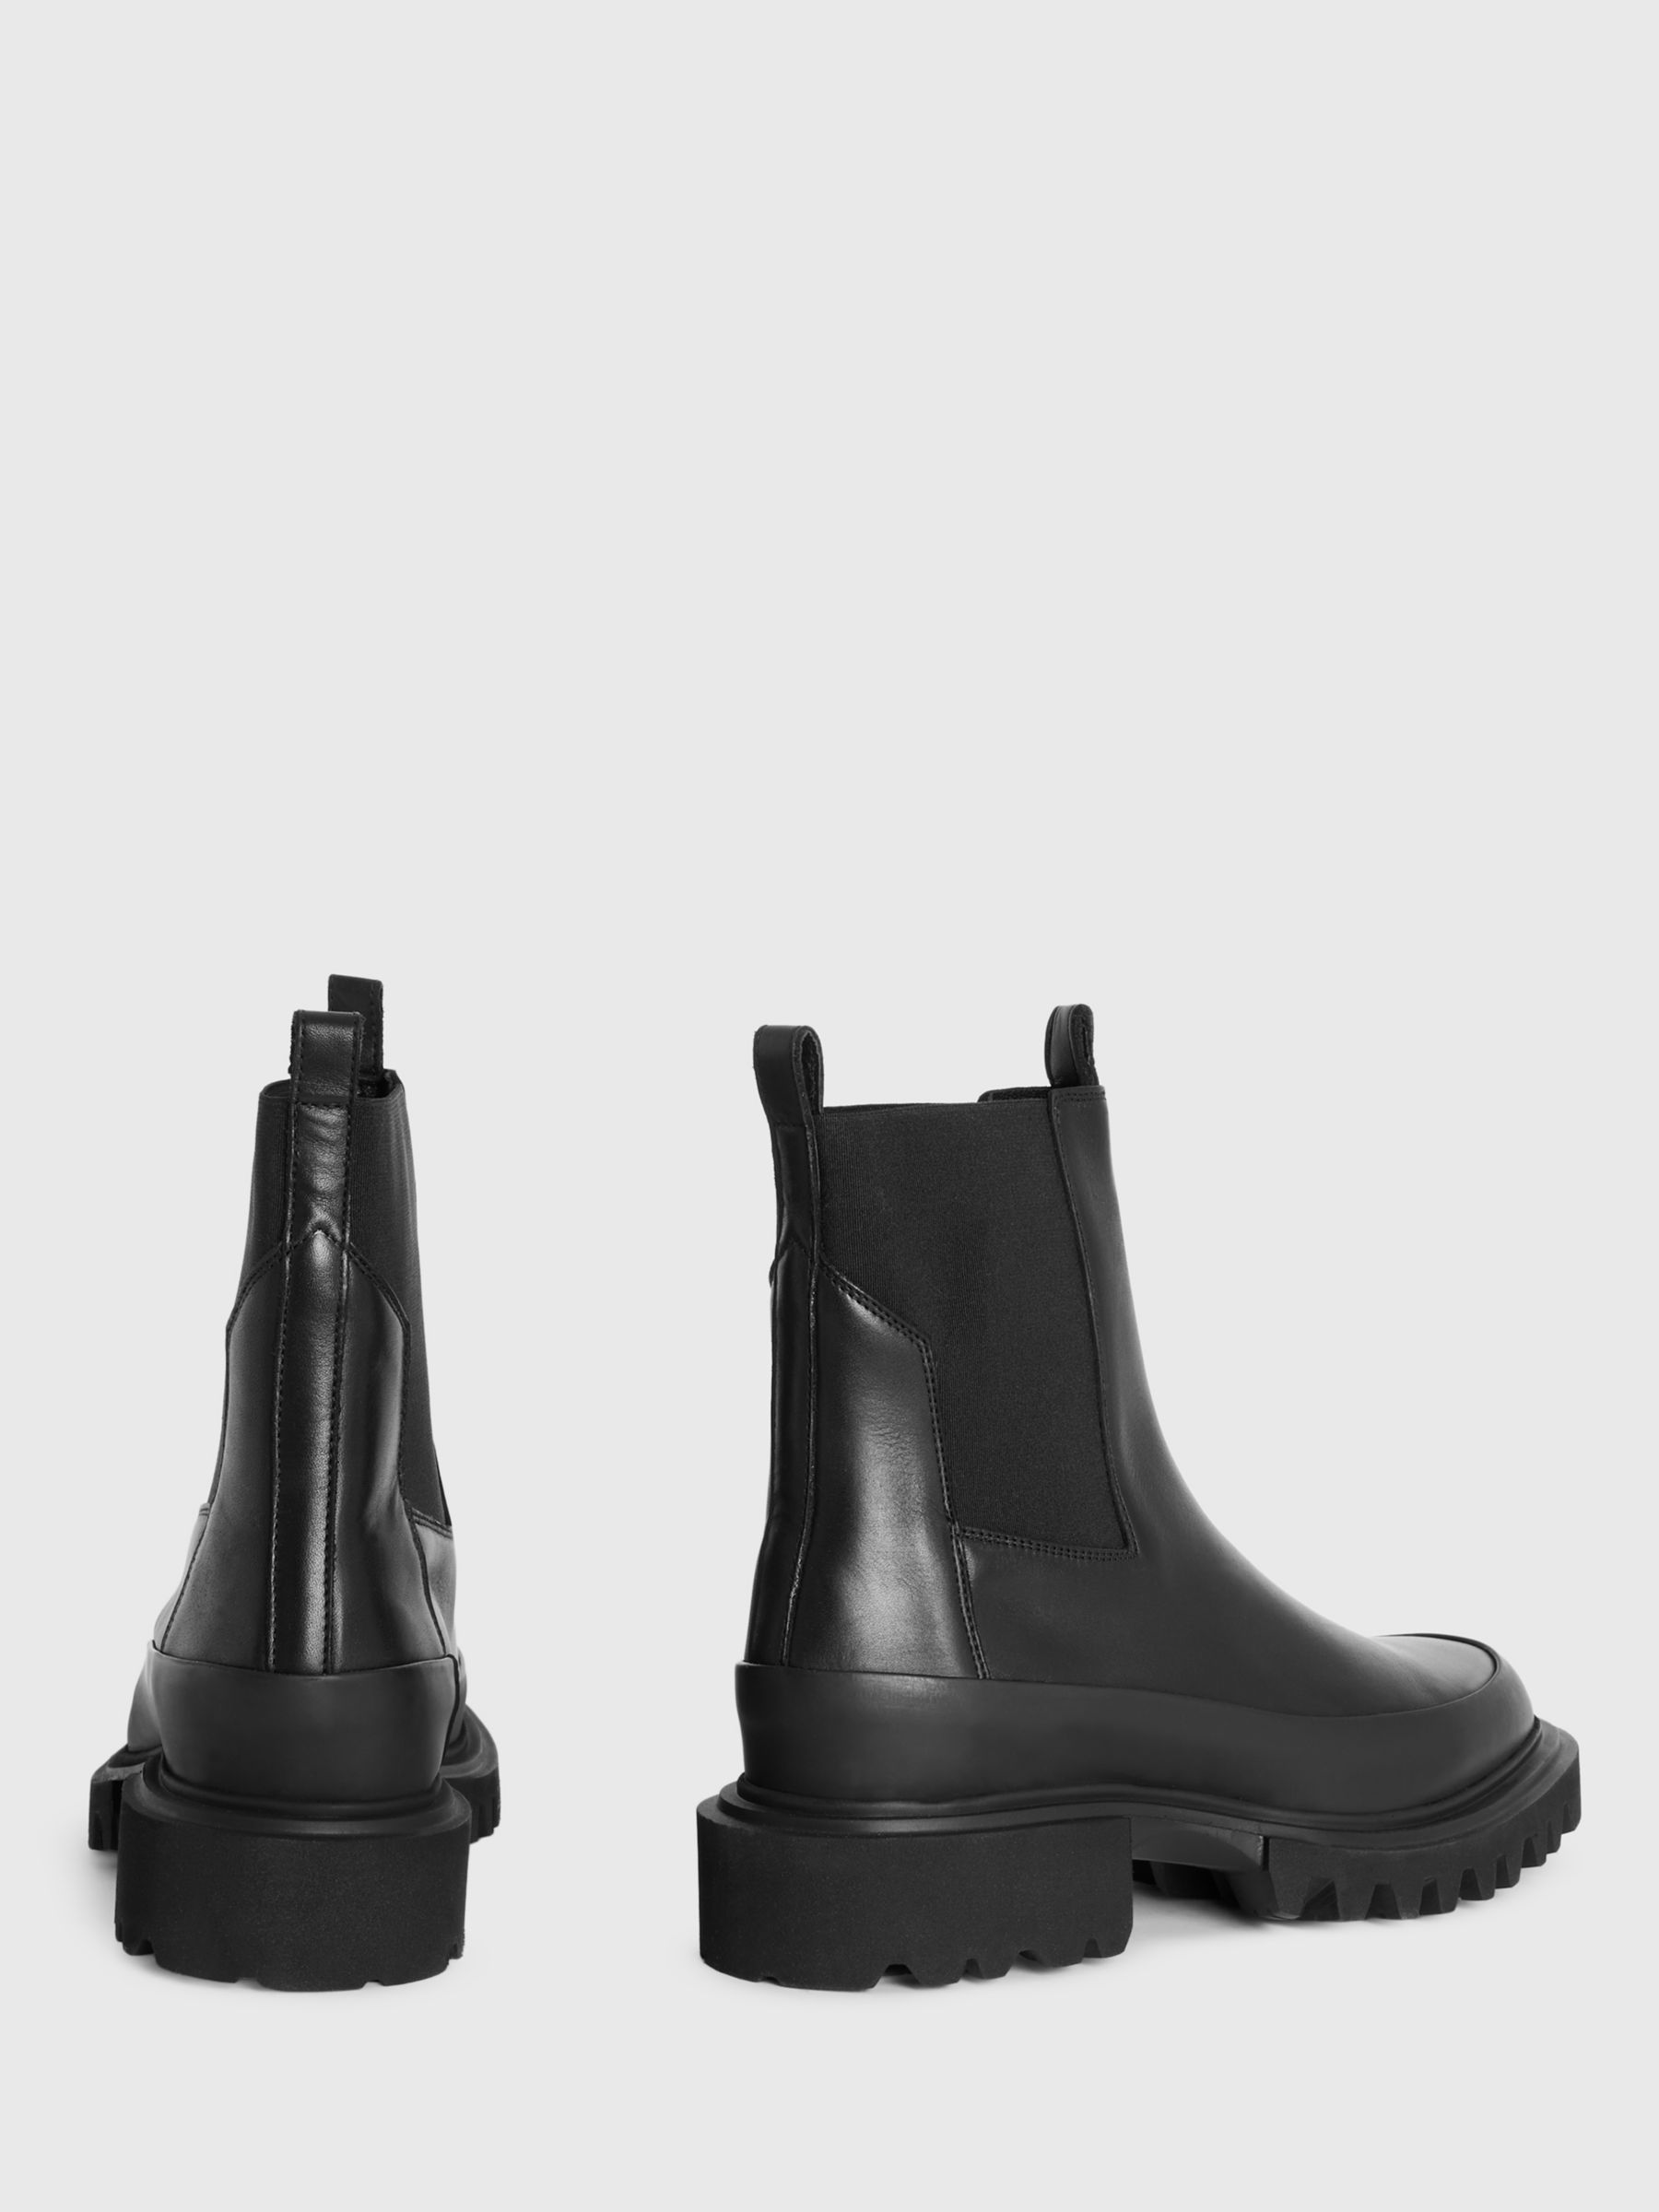 AllSaints Harlee Leather Ankle Boots, Black at John Lewis & Partners